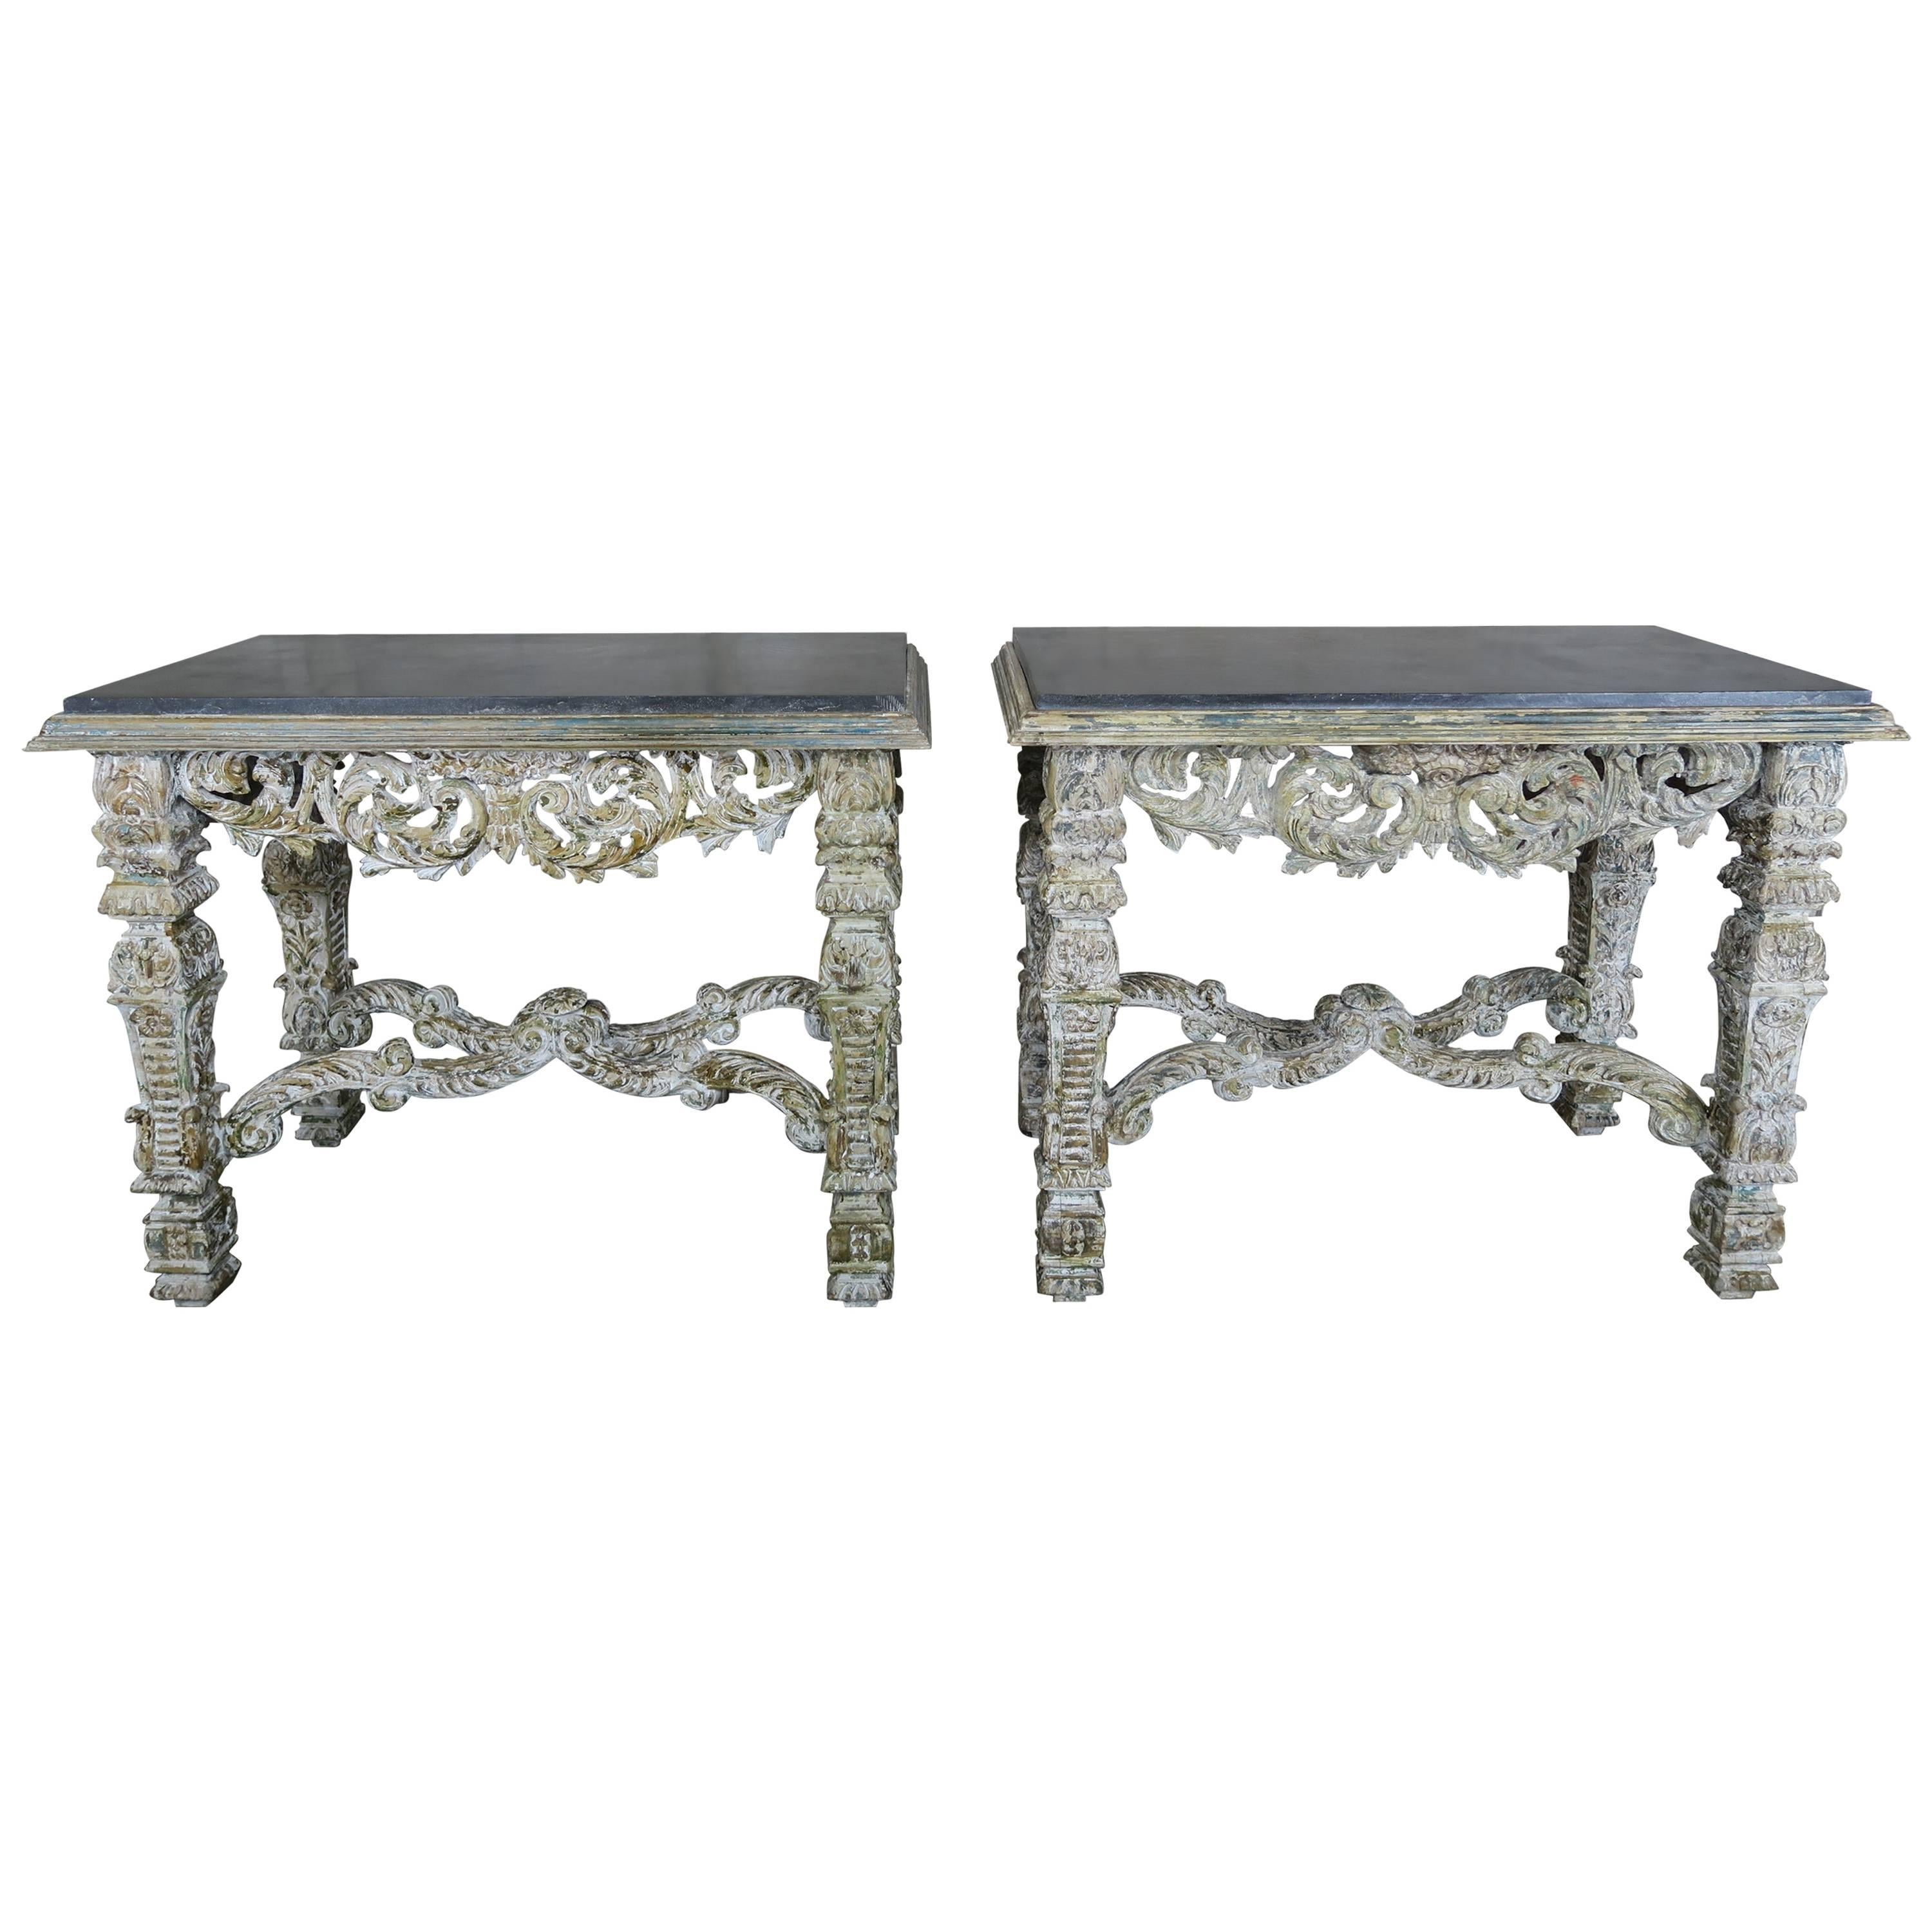 Italian Painted Consoles with Black Marble Tops, Pair